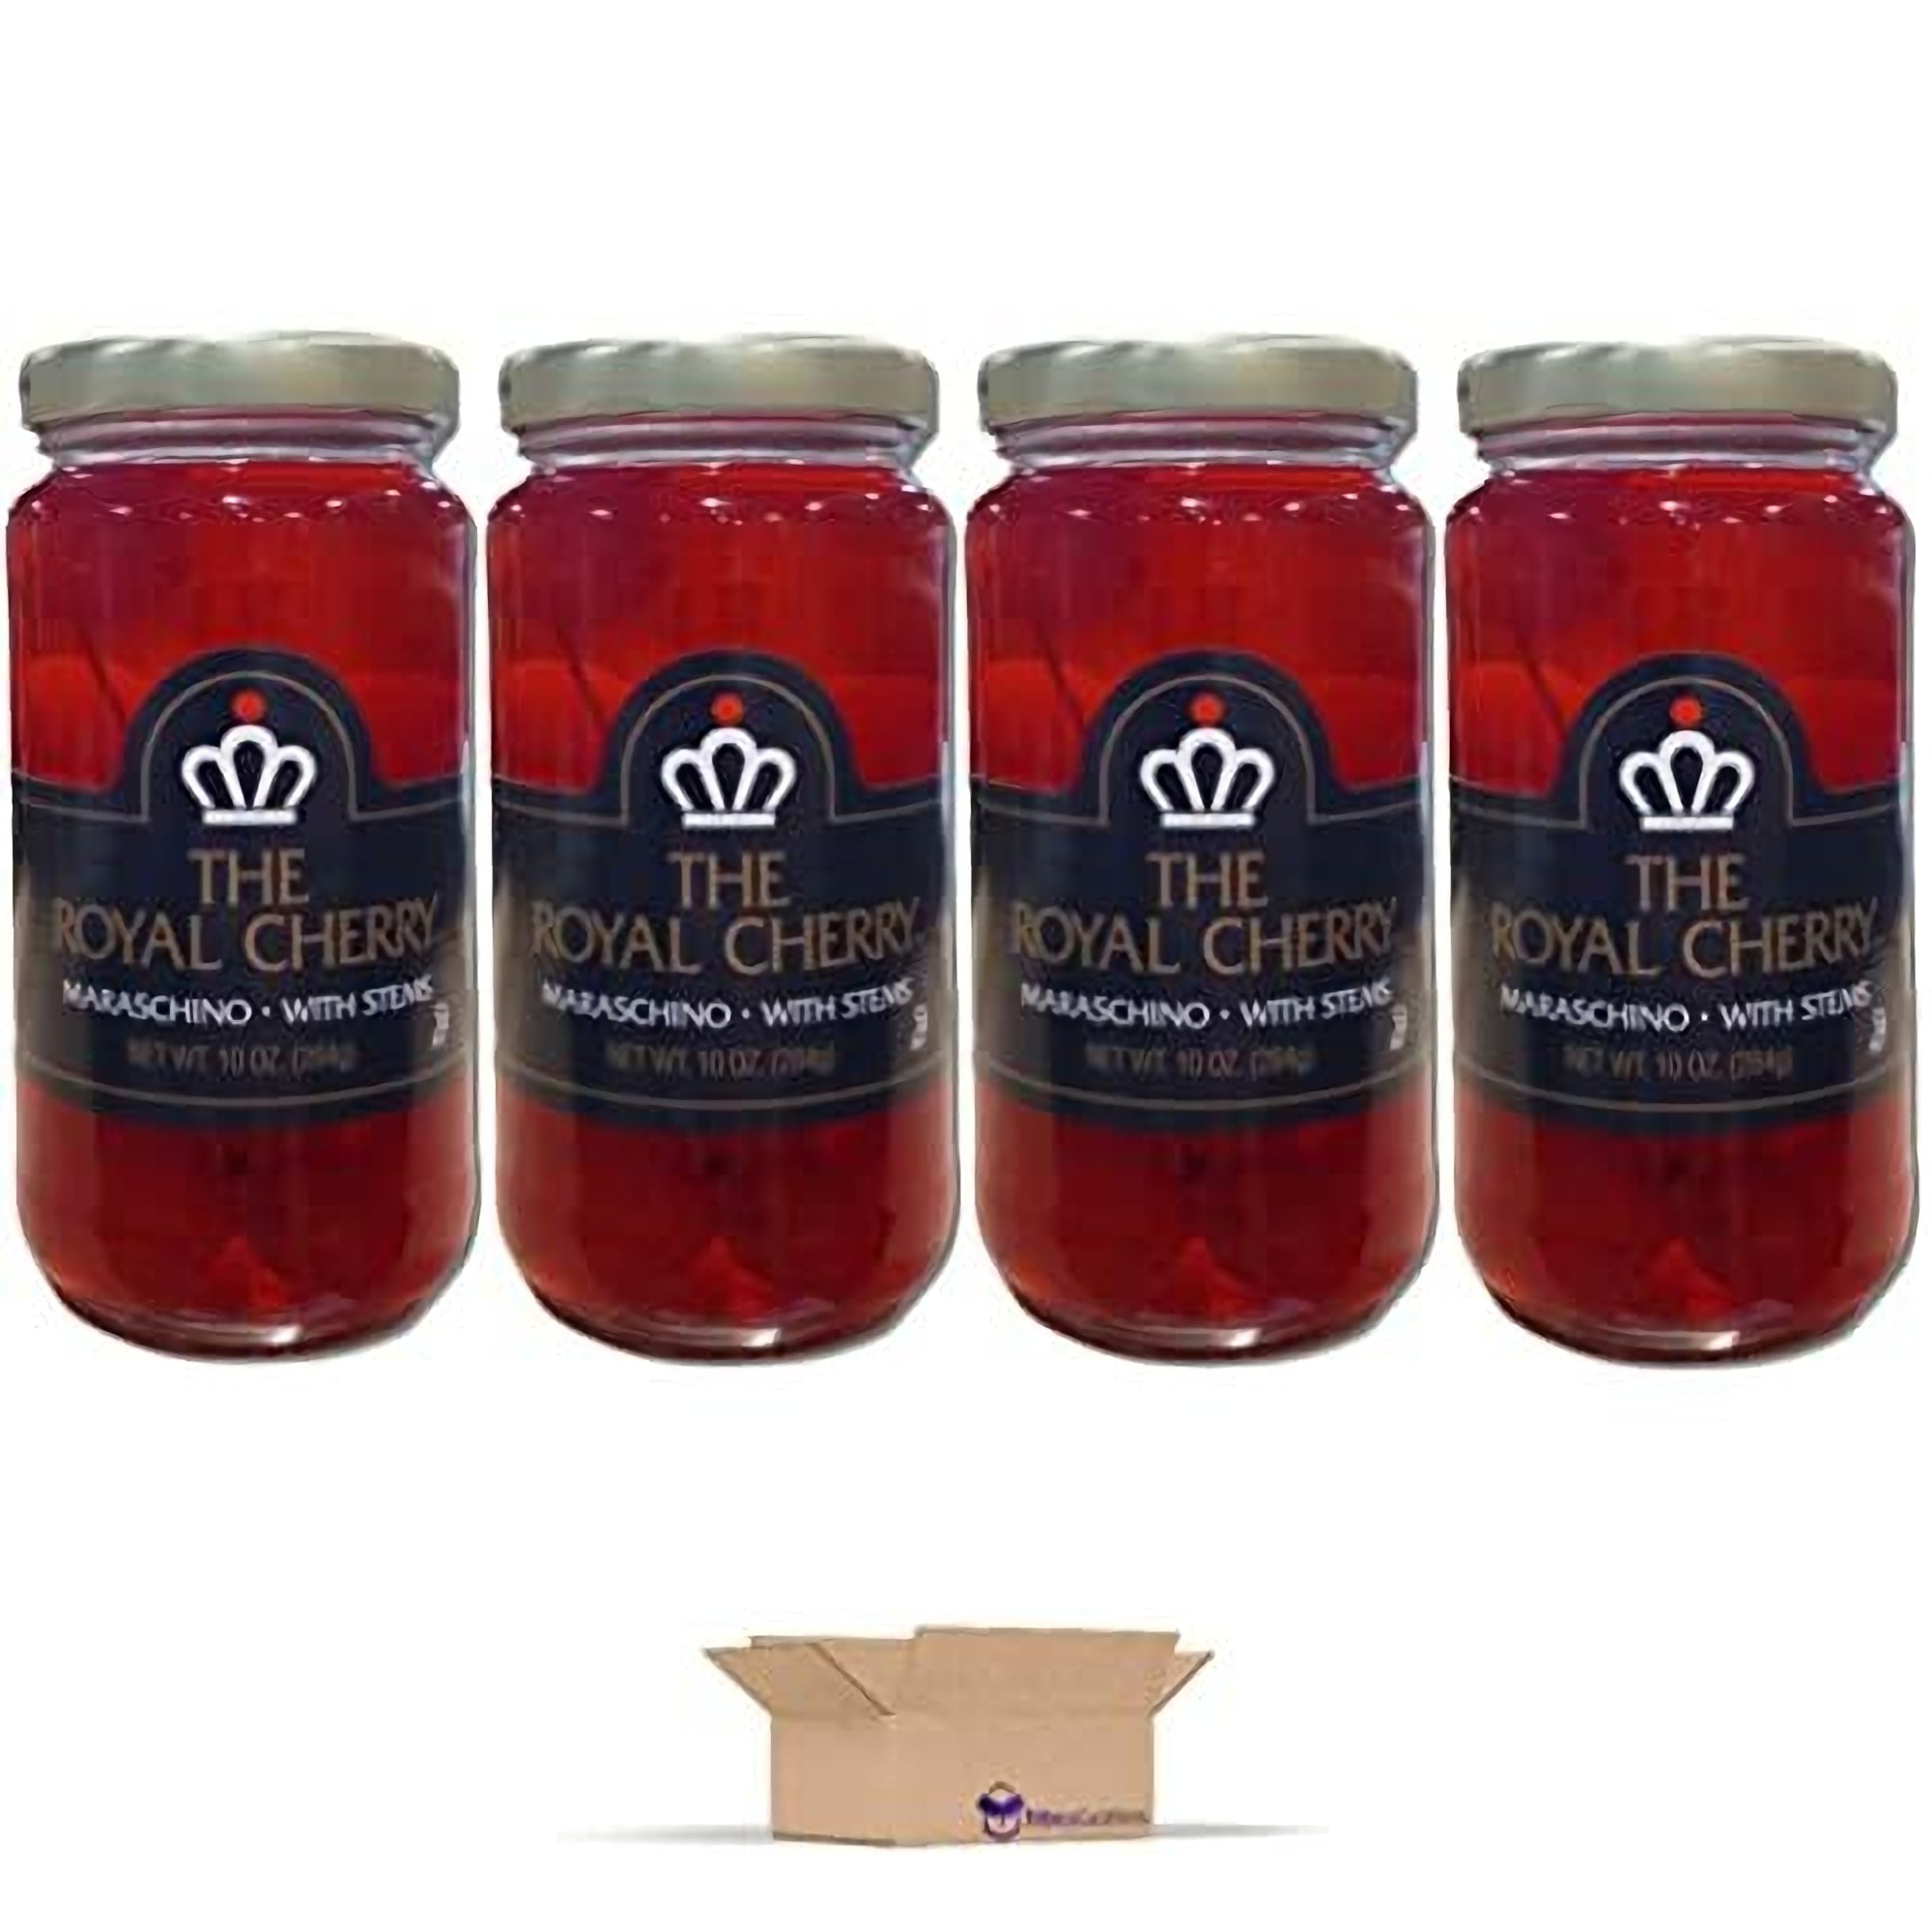 The Royal Cherry Maraschino Cherries With Stems Value Pack 10 Oz Jar Pack Of 4